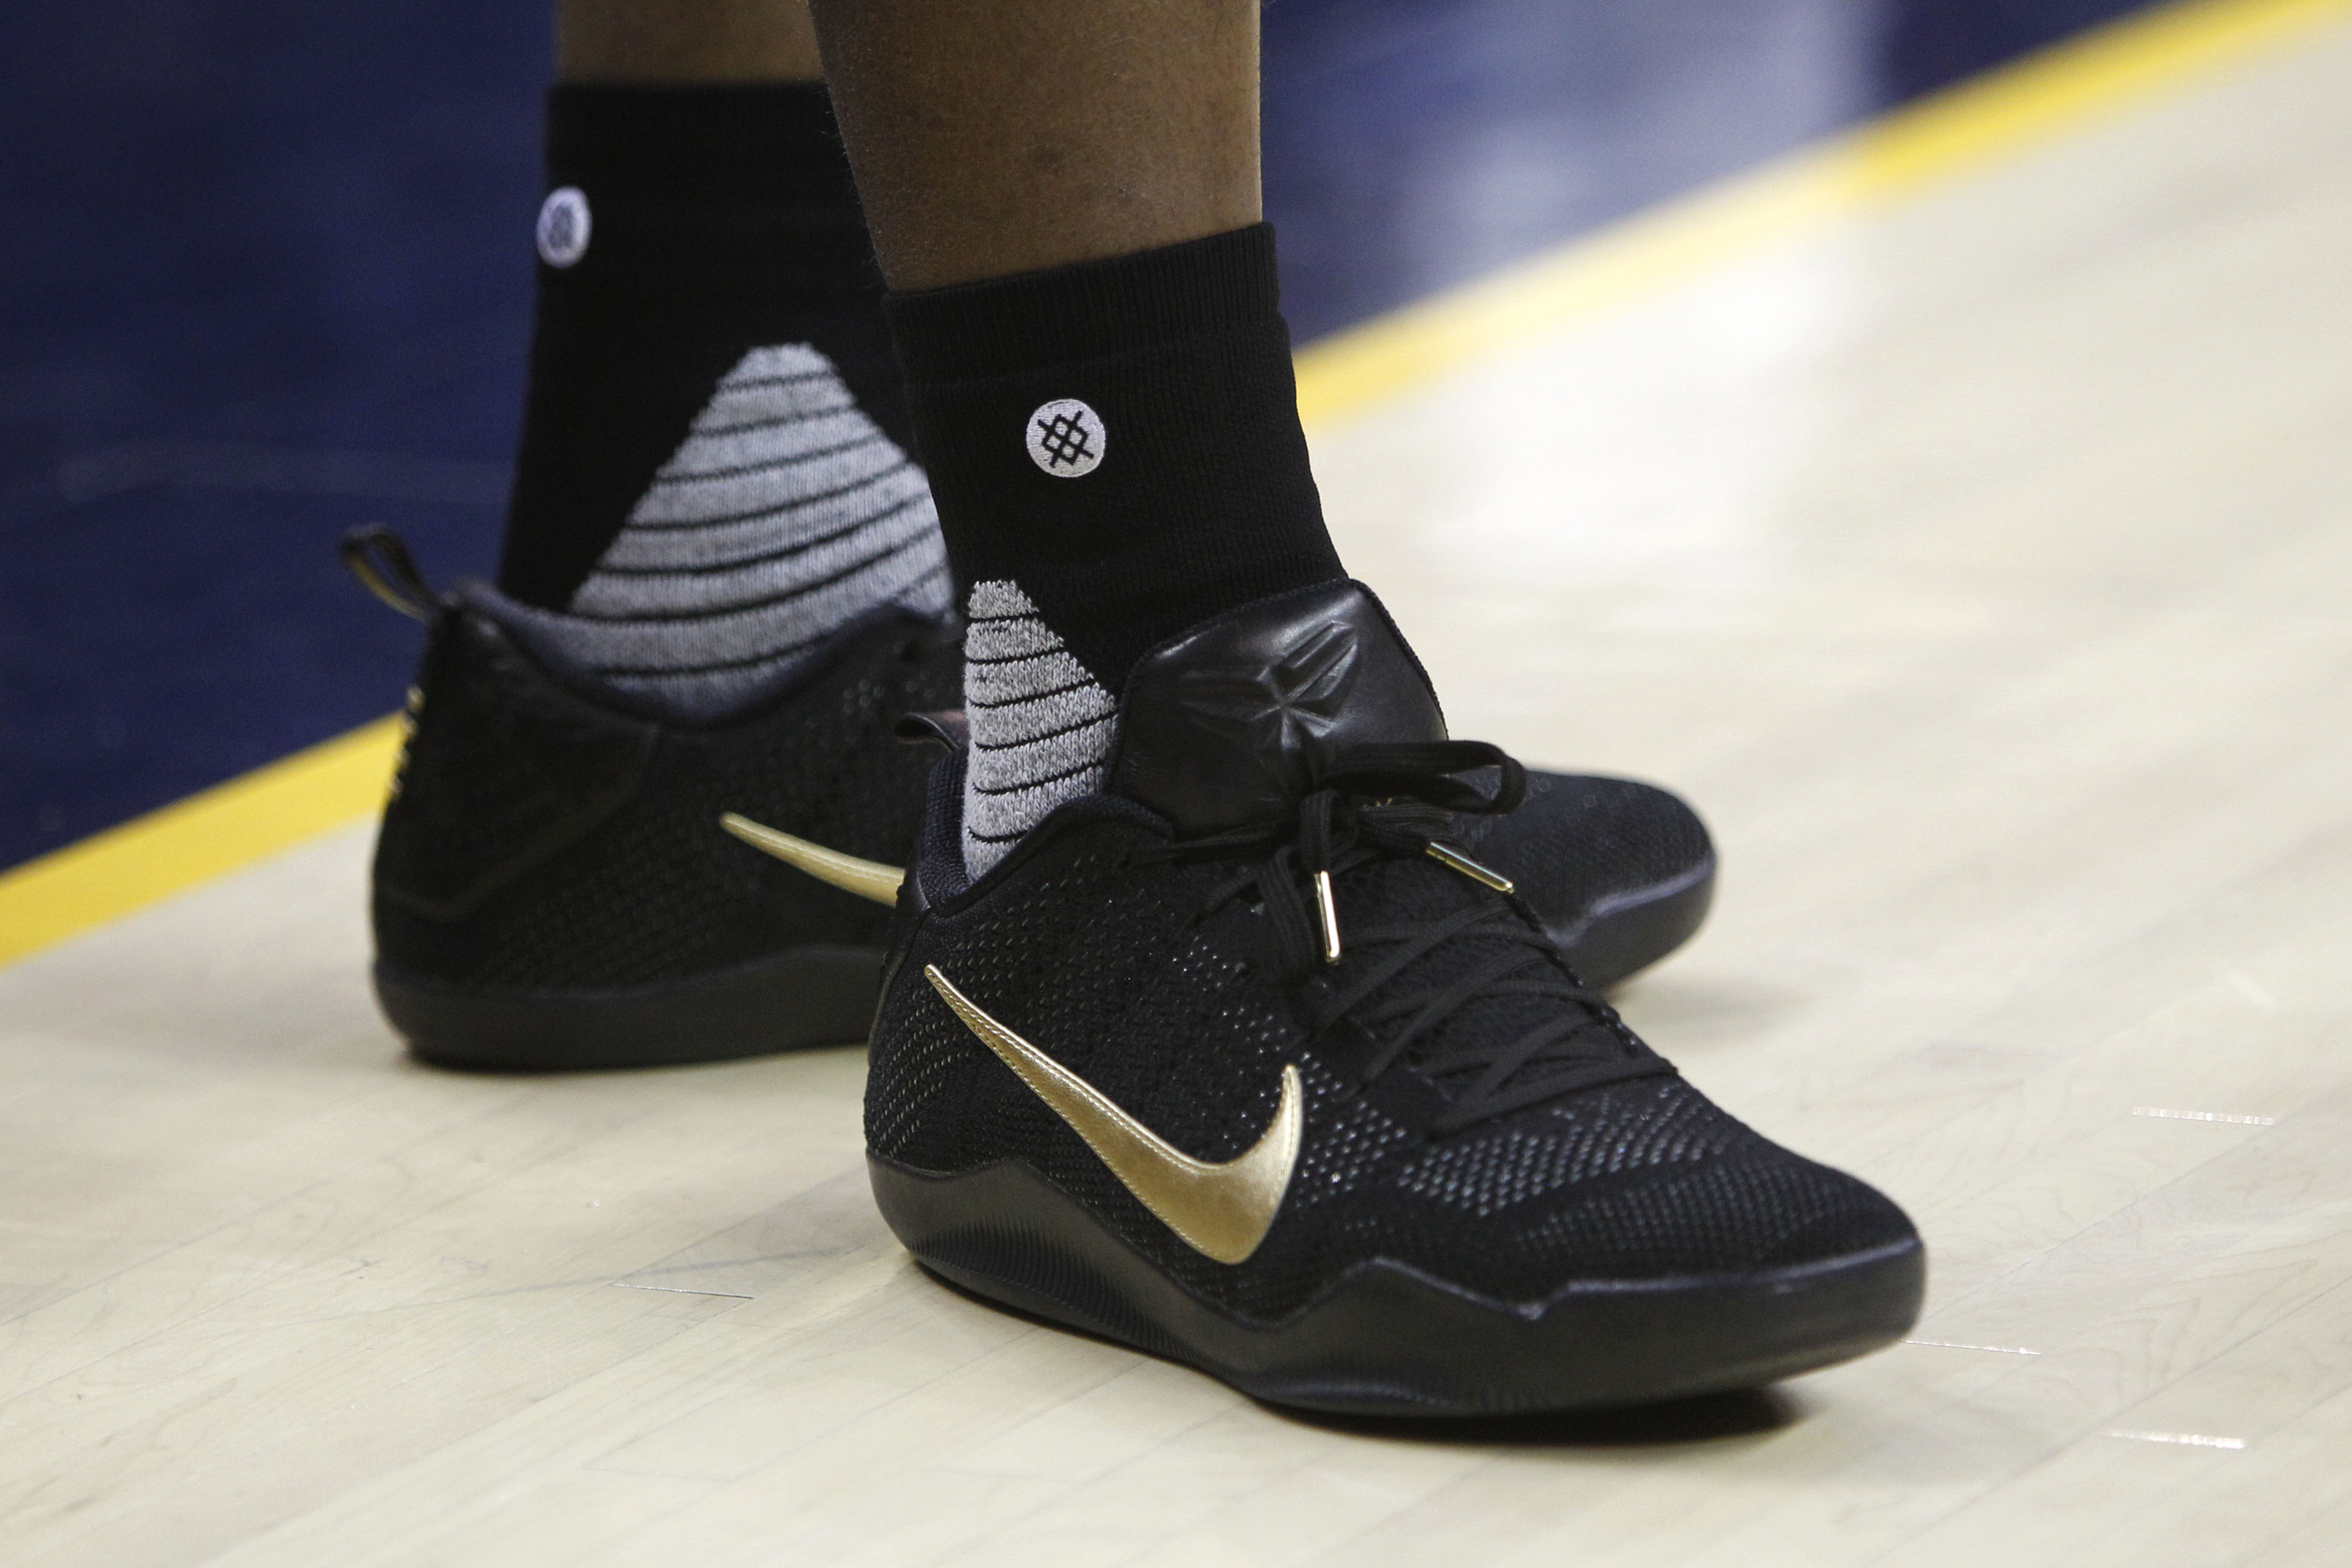 Stanley Johnson's Kobe 11's Could Be 